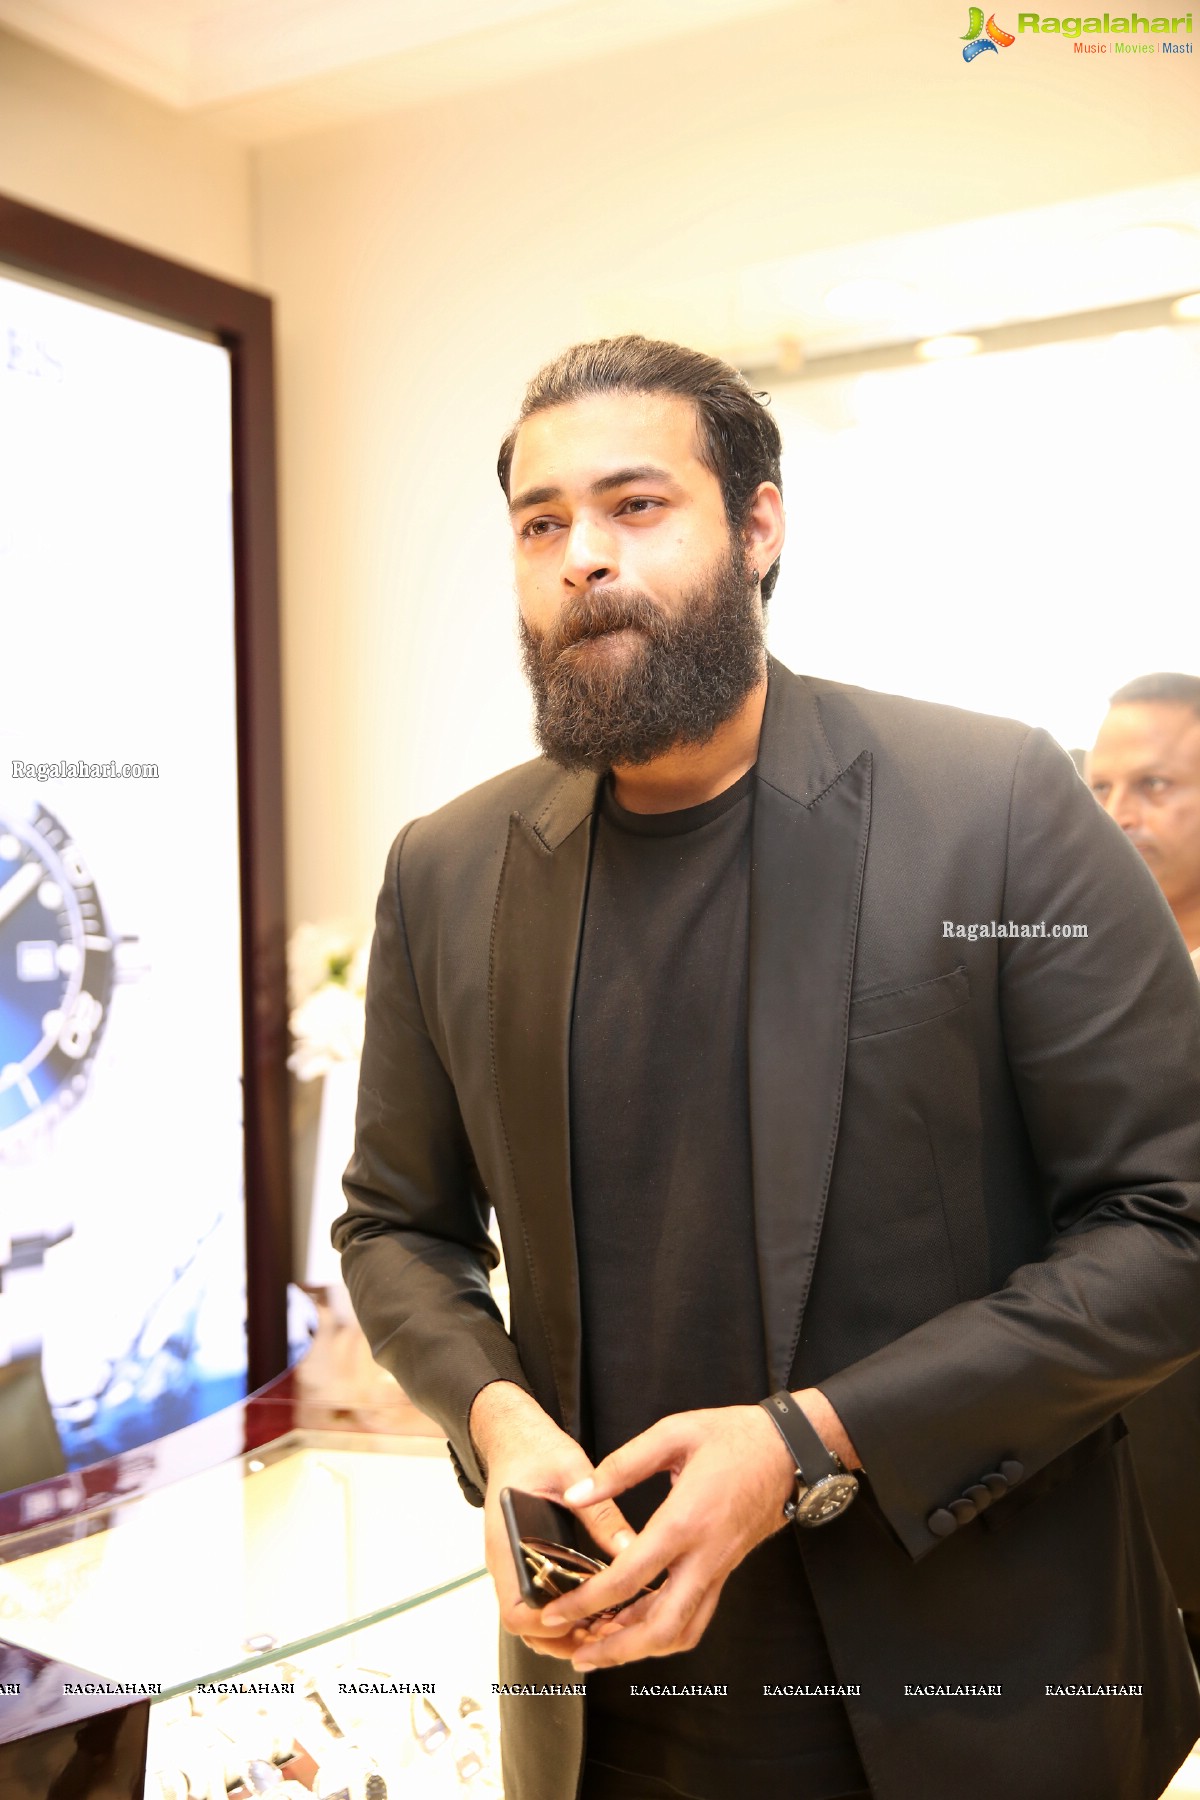 Longines Showcases Its HydroConquest Collection In The Presence of Varun Tej